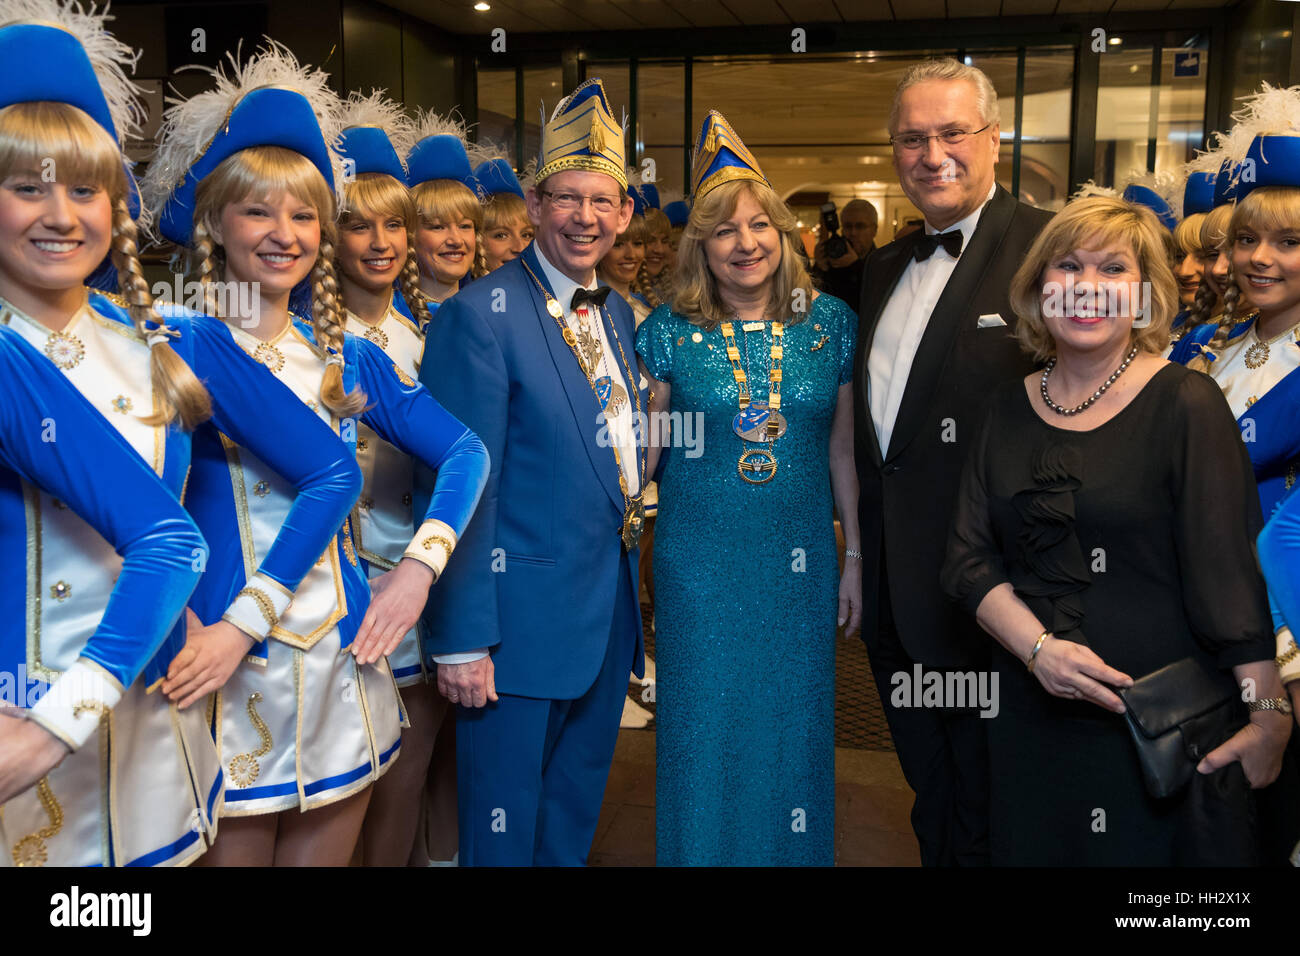 Nuremberg, Germany. 15th Jan, 2017. Bavarian Minister of the Interior Joachim Herrmann (2nd r, CSU) and his wife Gerswid (r) stand between the active guard of the 'Nuernberger Luftflotte des Prinzen Karneval' (lit. 'Nuremberg Air Fleet of Prince Carnival', NLF) with the 1st NLF Chairwoman Waldtraud Mammen and the NLF President Joerg Philips during the ceremony of the carnival medal 'Wider die Neidhammel' in Nuremberg, Germany, 15 January 2017. Herrmann receives the medal of the carnival association in order to be protected from enviers. Photo: Daniel Karmann/dpa/Alamy Live News Stock Photo